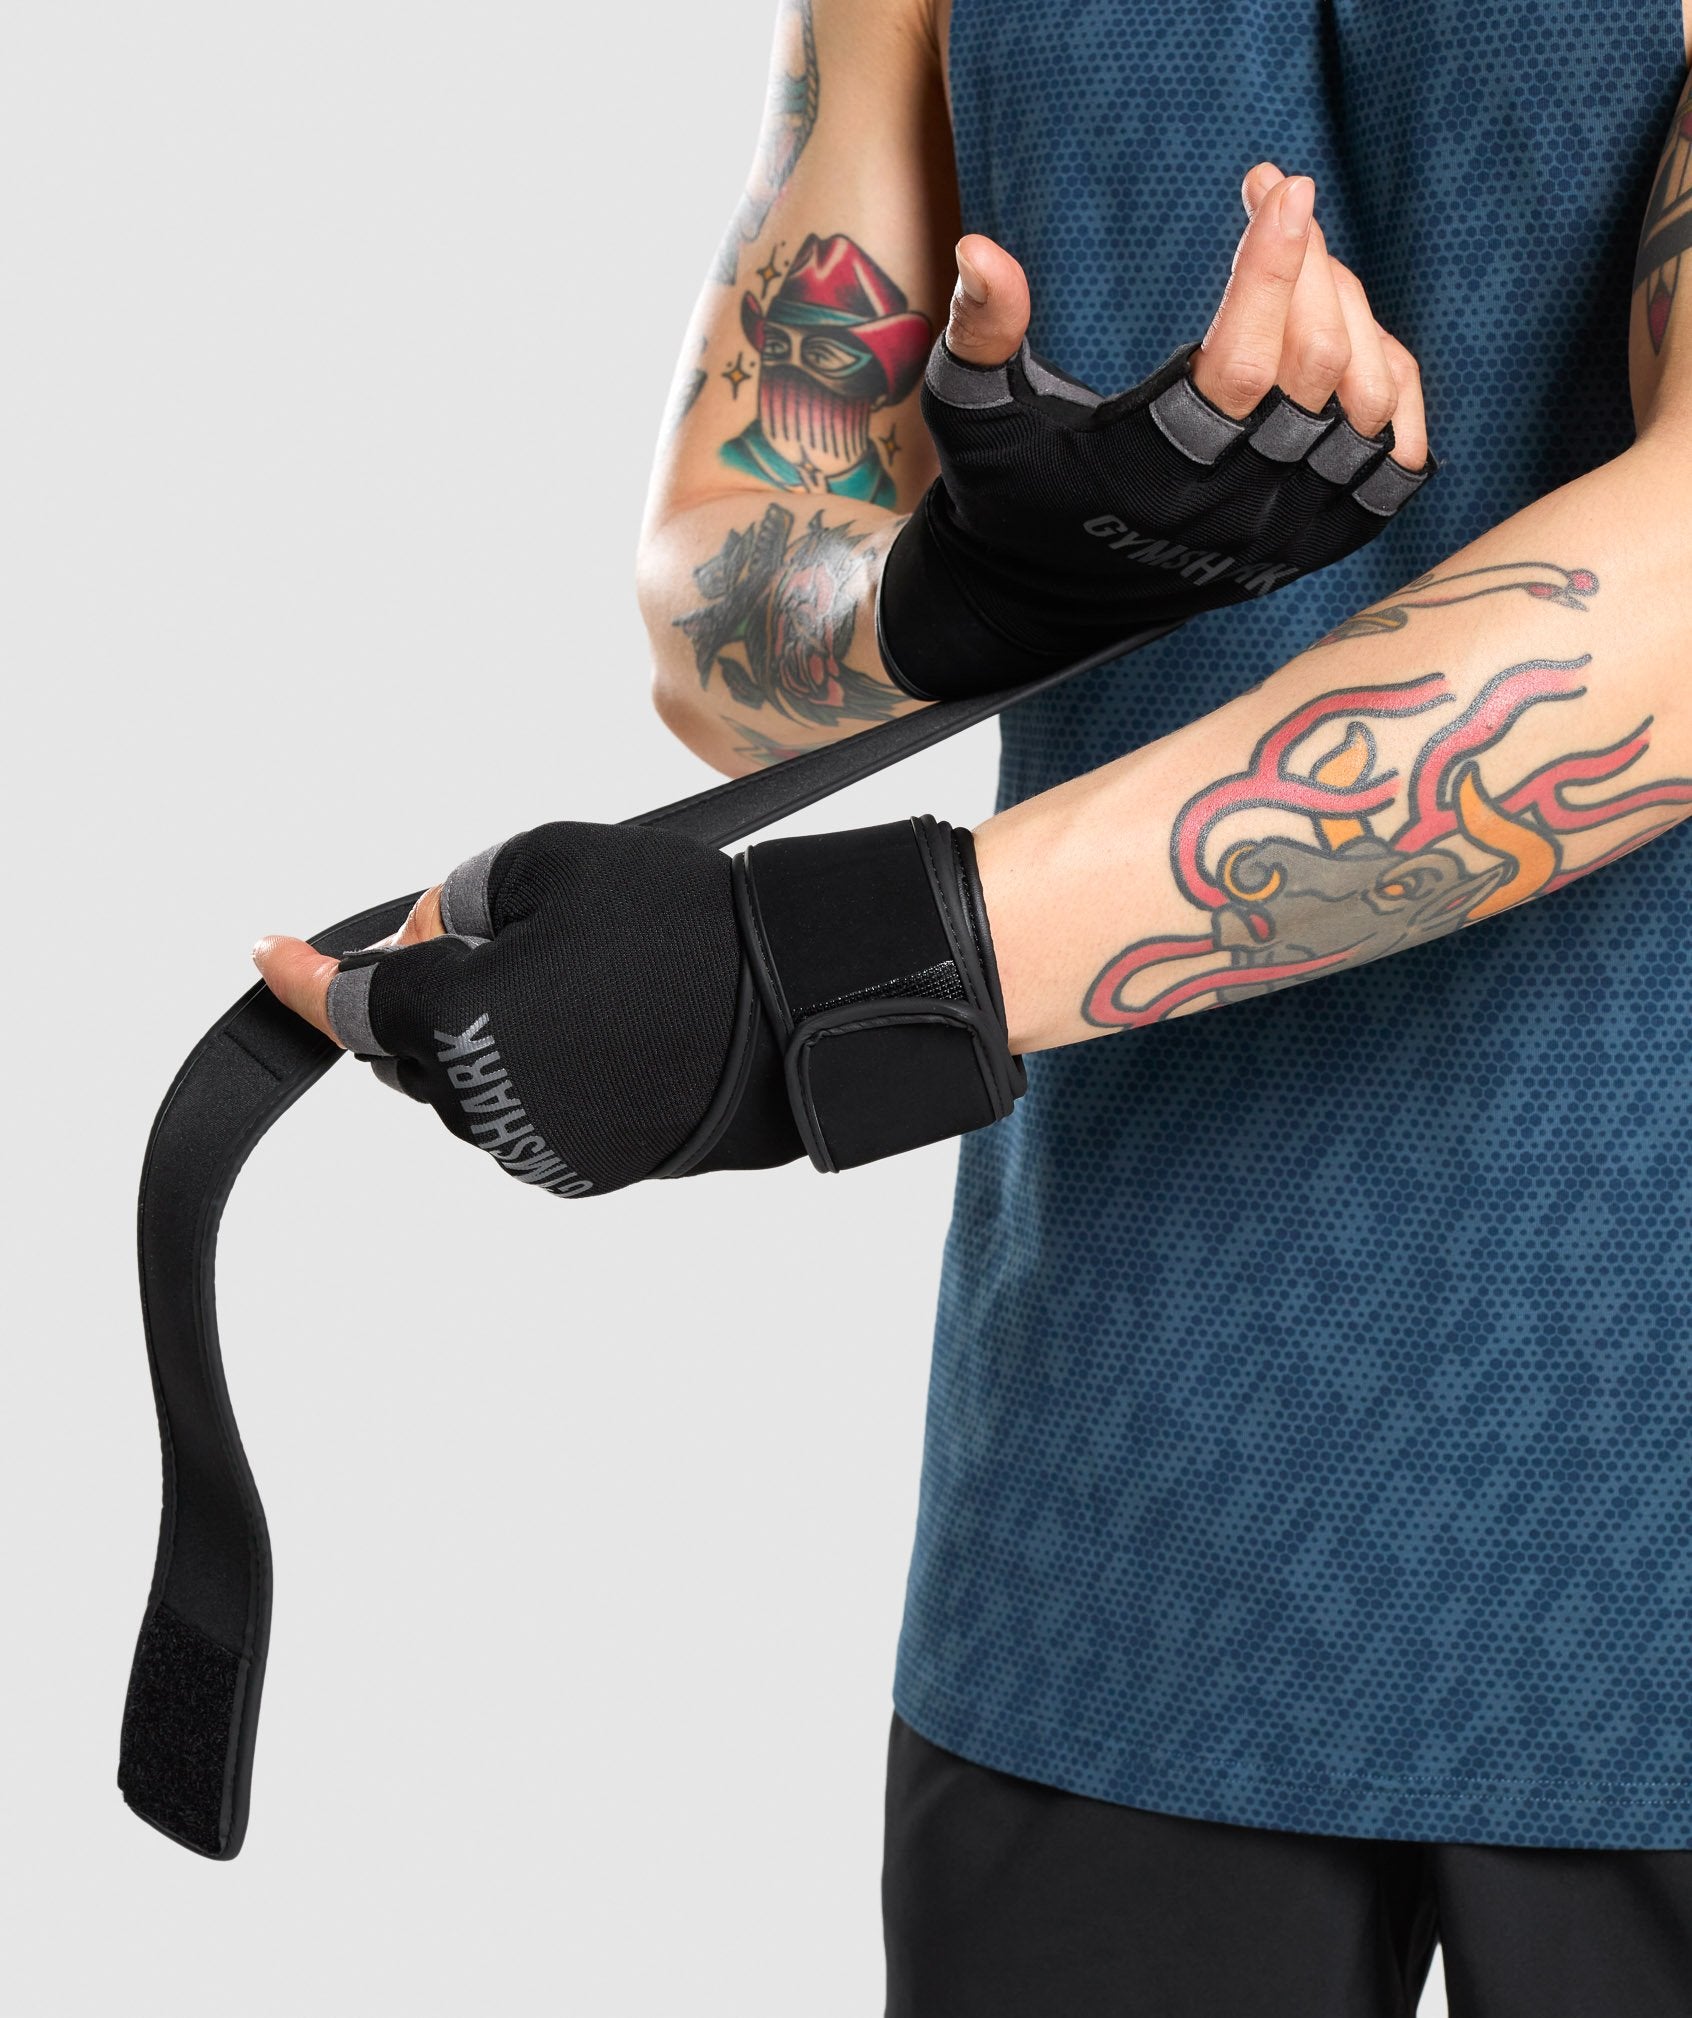 Wrap Lifting Gloves in Black